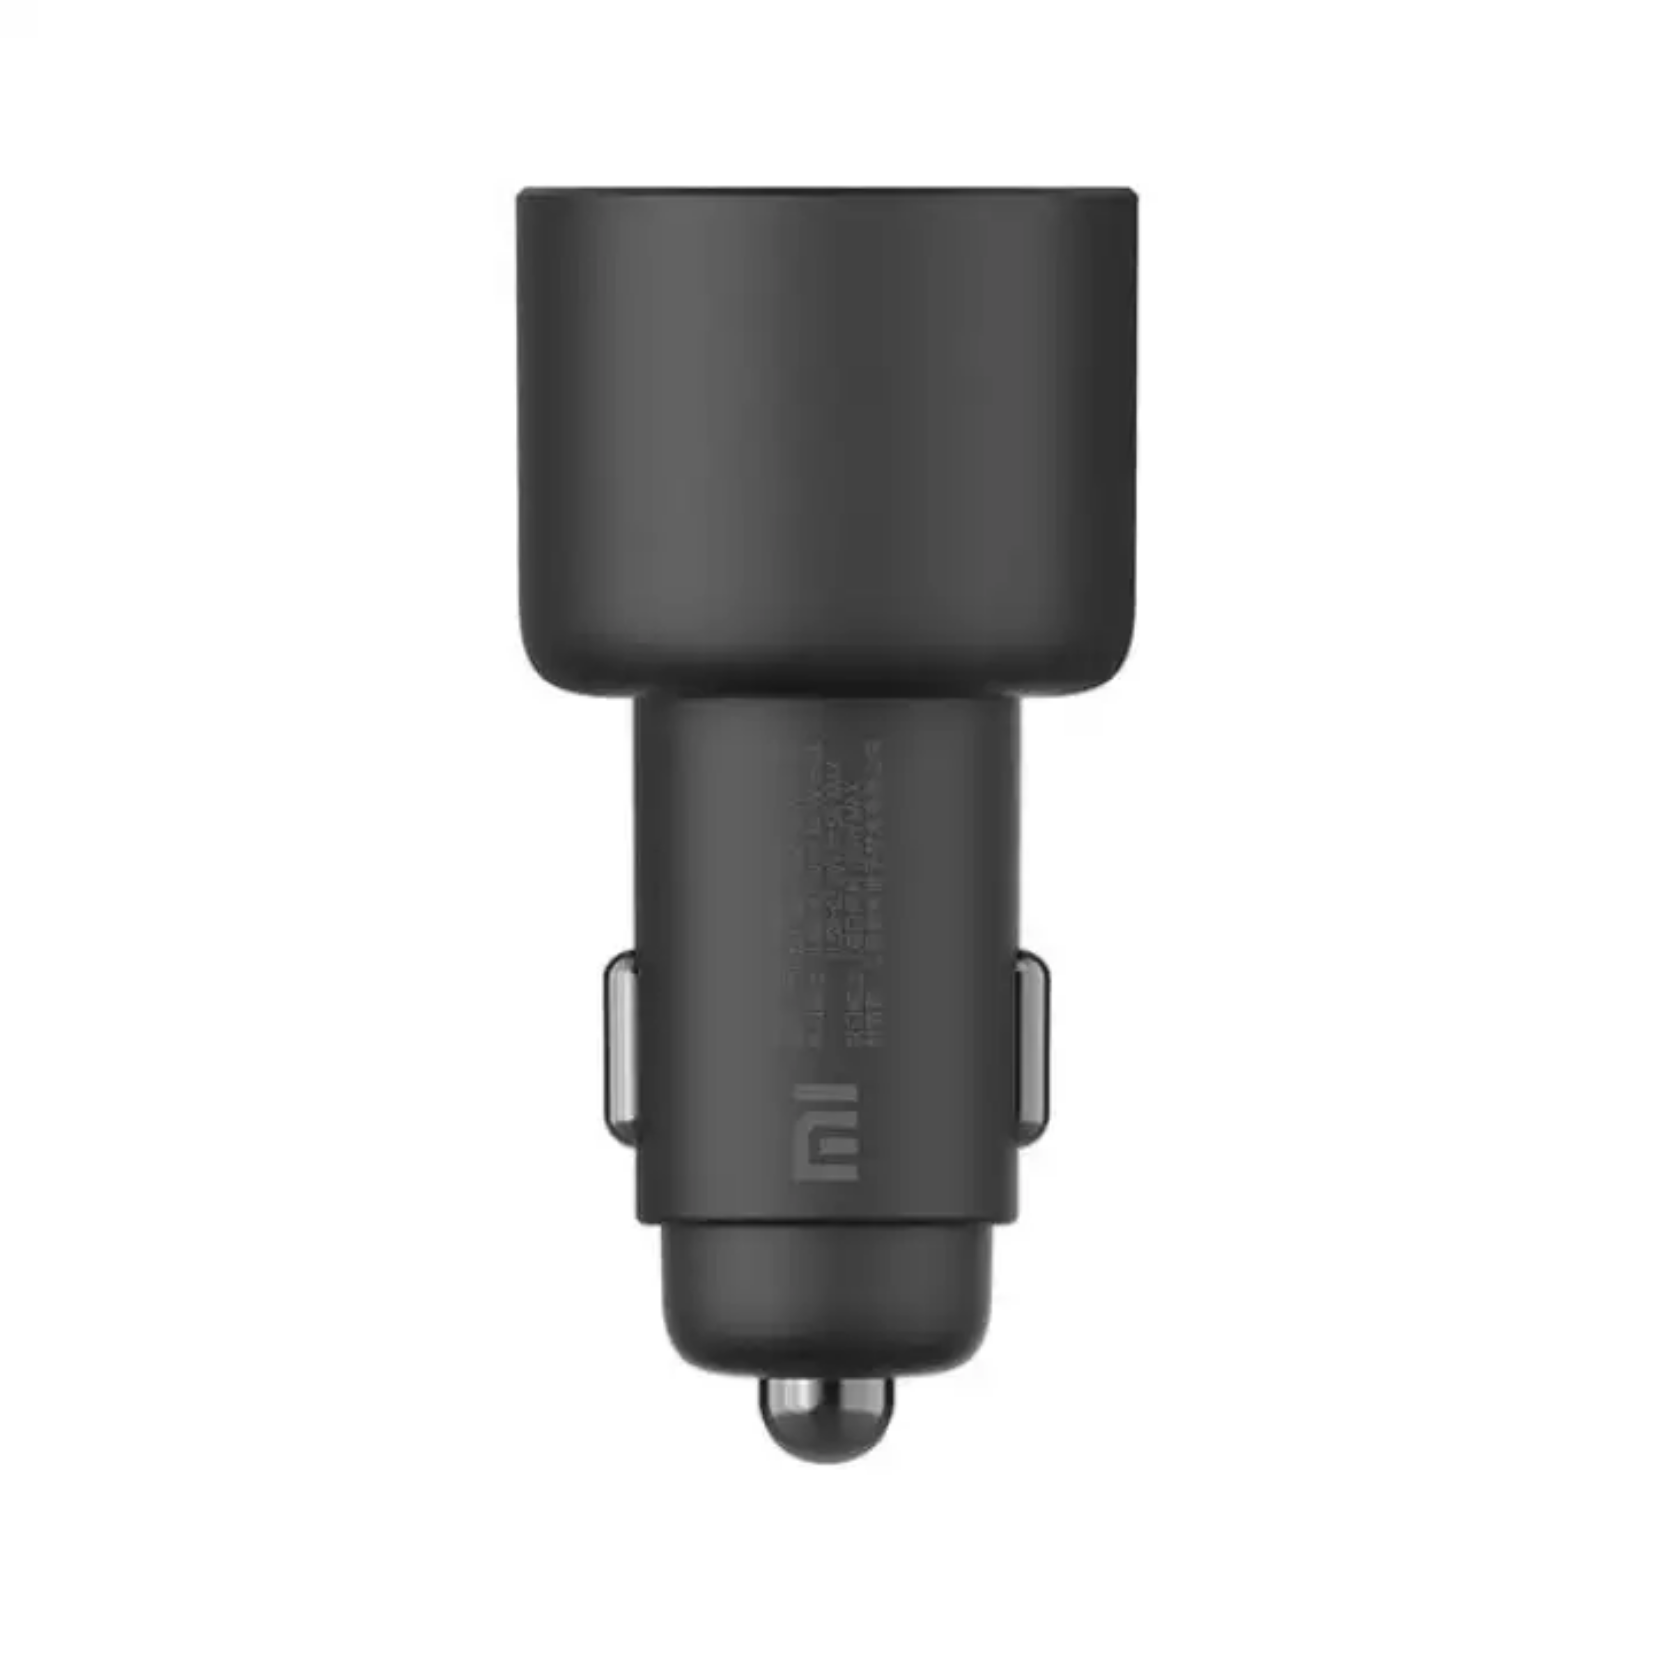 Xiaomi Car Charger USB Type-C Ultrafast 100W - 100W Maximum Fast Charging | Support 5A High Current | Fully Compatible With Smart Devices